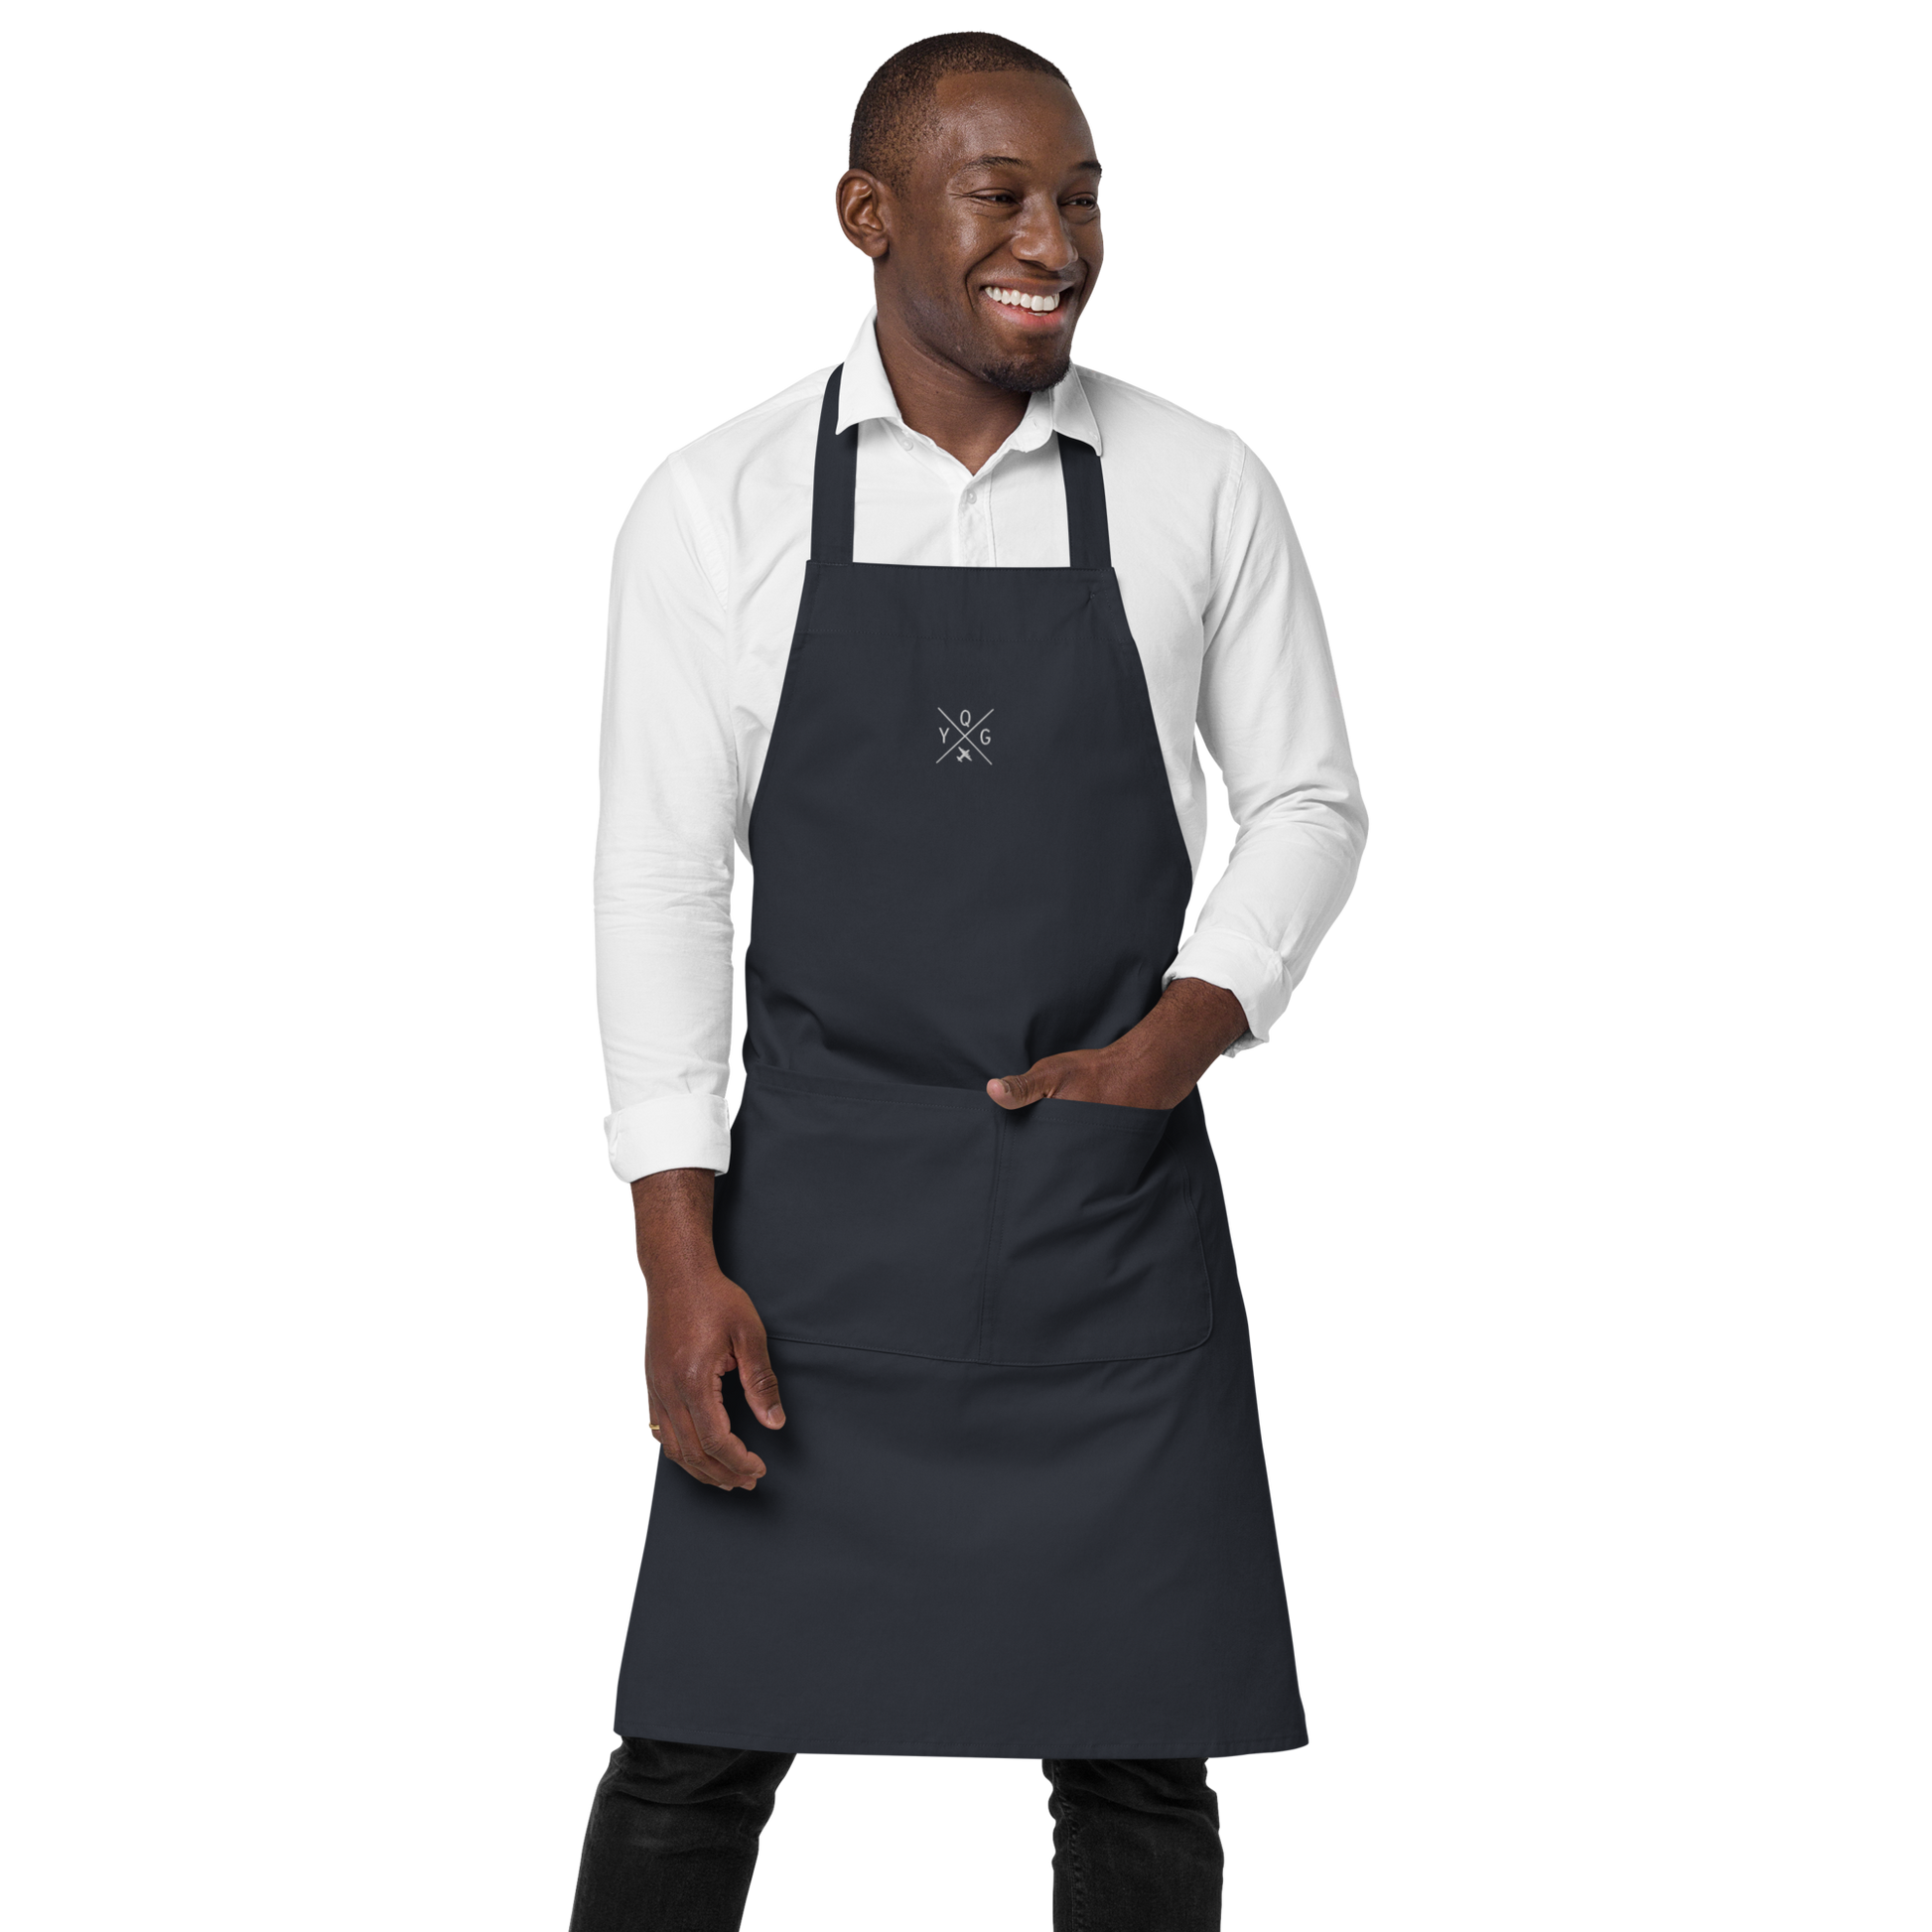 YHM Designs - YQG Windsor Organic Cotton Apron - Crossed-X Design with Airport Code and Vintage Propliner - White Embroidery - Image 11